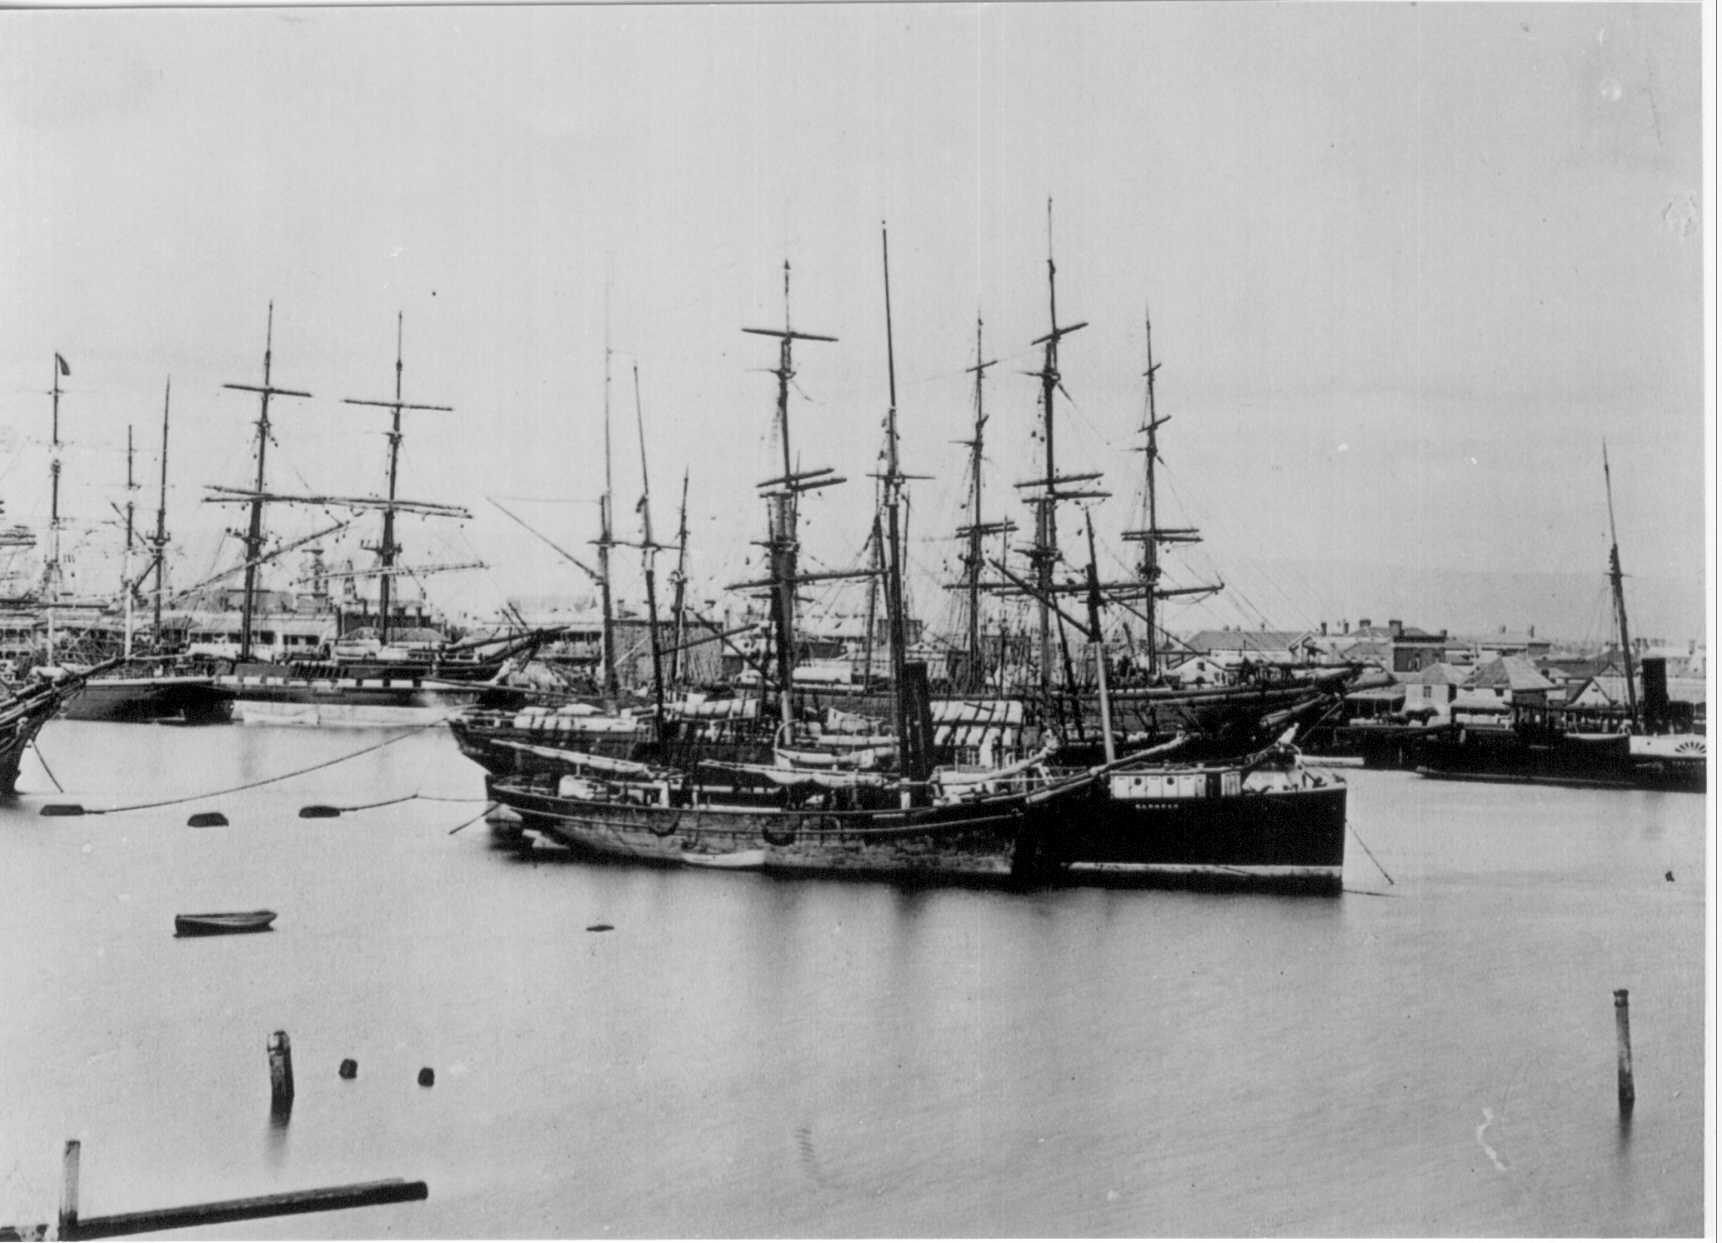 At Port Adelaide 1880s-1890s